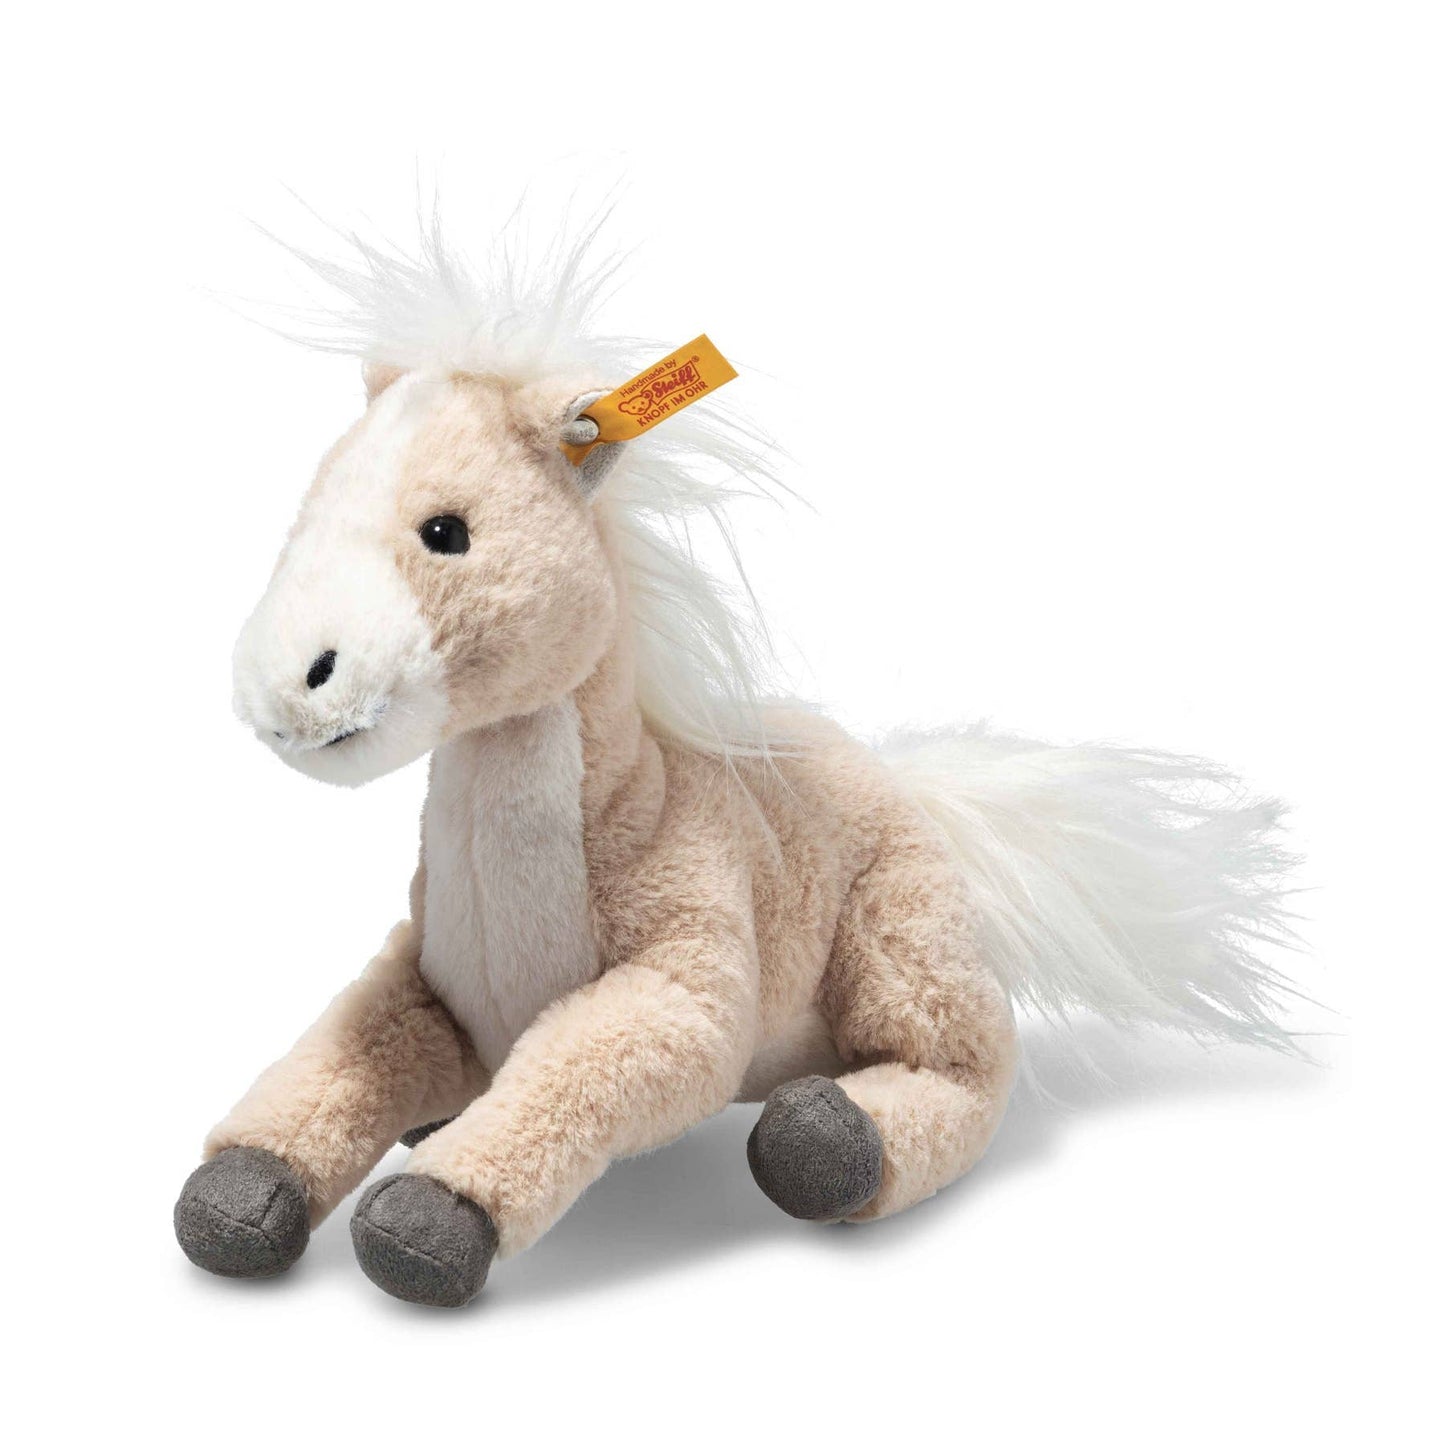 Gola Dangling Horse Soft Plush Toy, 7 Inches